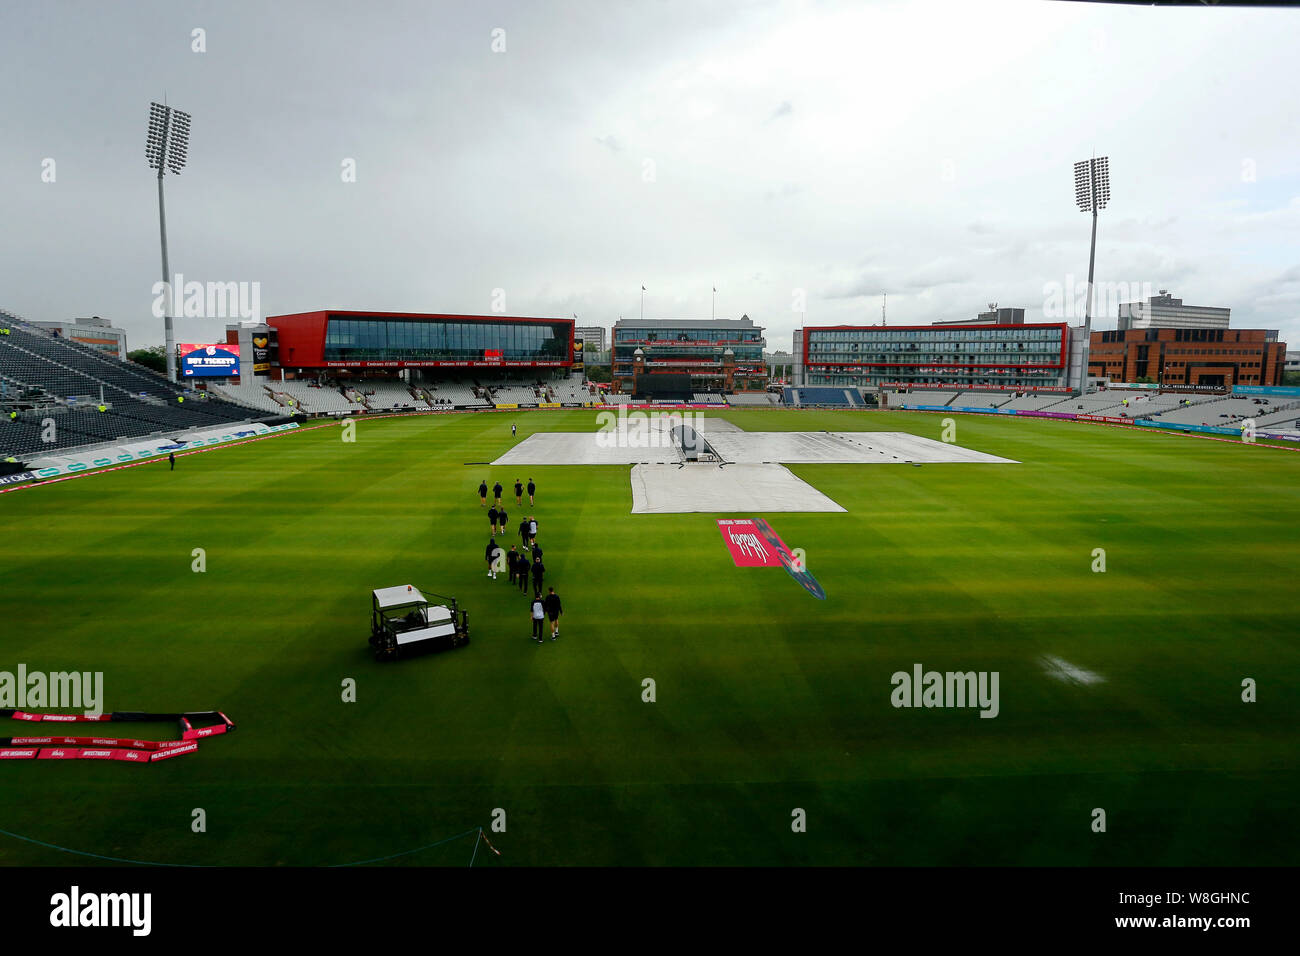 Emirates Old Trafford, Manchester, UK. 9th Aug, 2019. T20 Cricket Lancashire Lightning versus Yorkshire Vikings; Rain falling over Old Trafford and the pitch remains covered with less than an hour to the scheduled start of play - Editorial Use Only Credit: Action Plus Sports/Alamy Live News Stock Photo